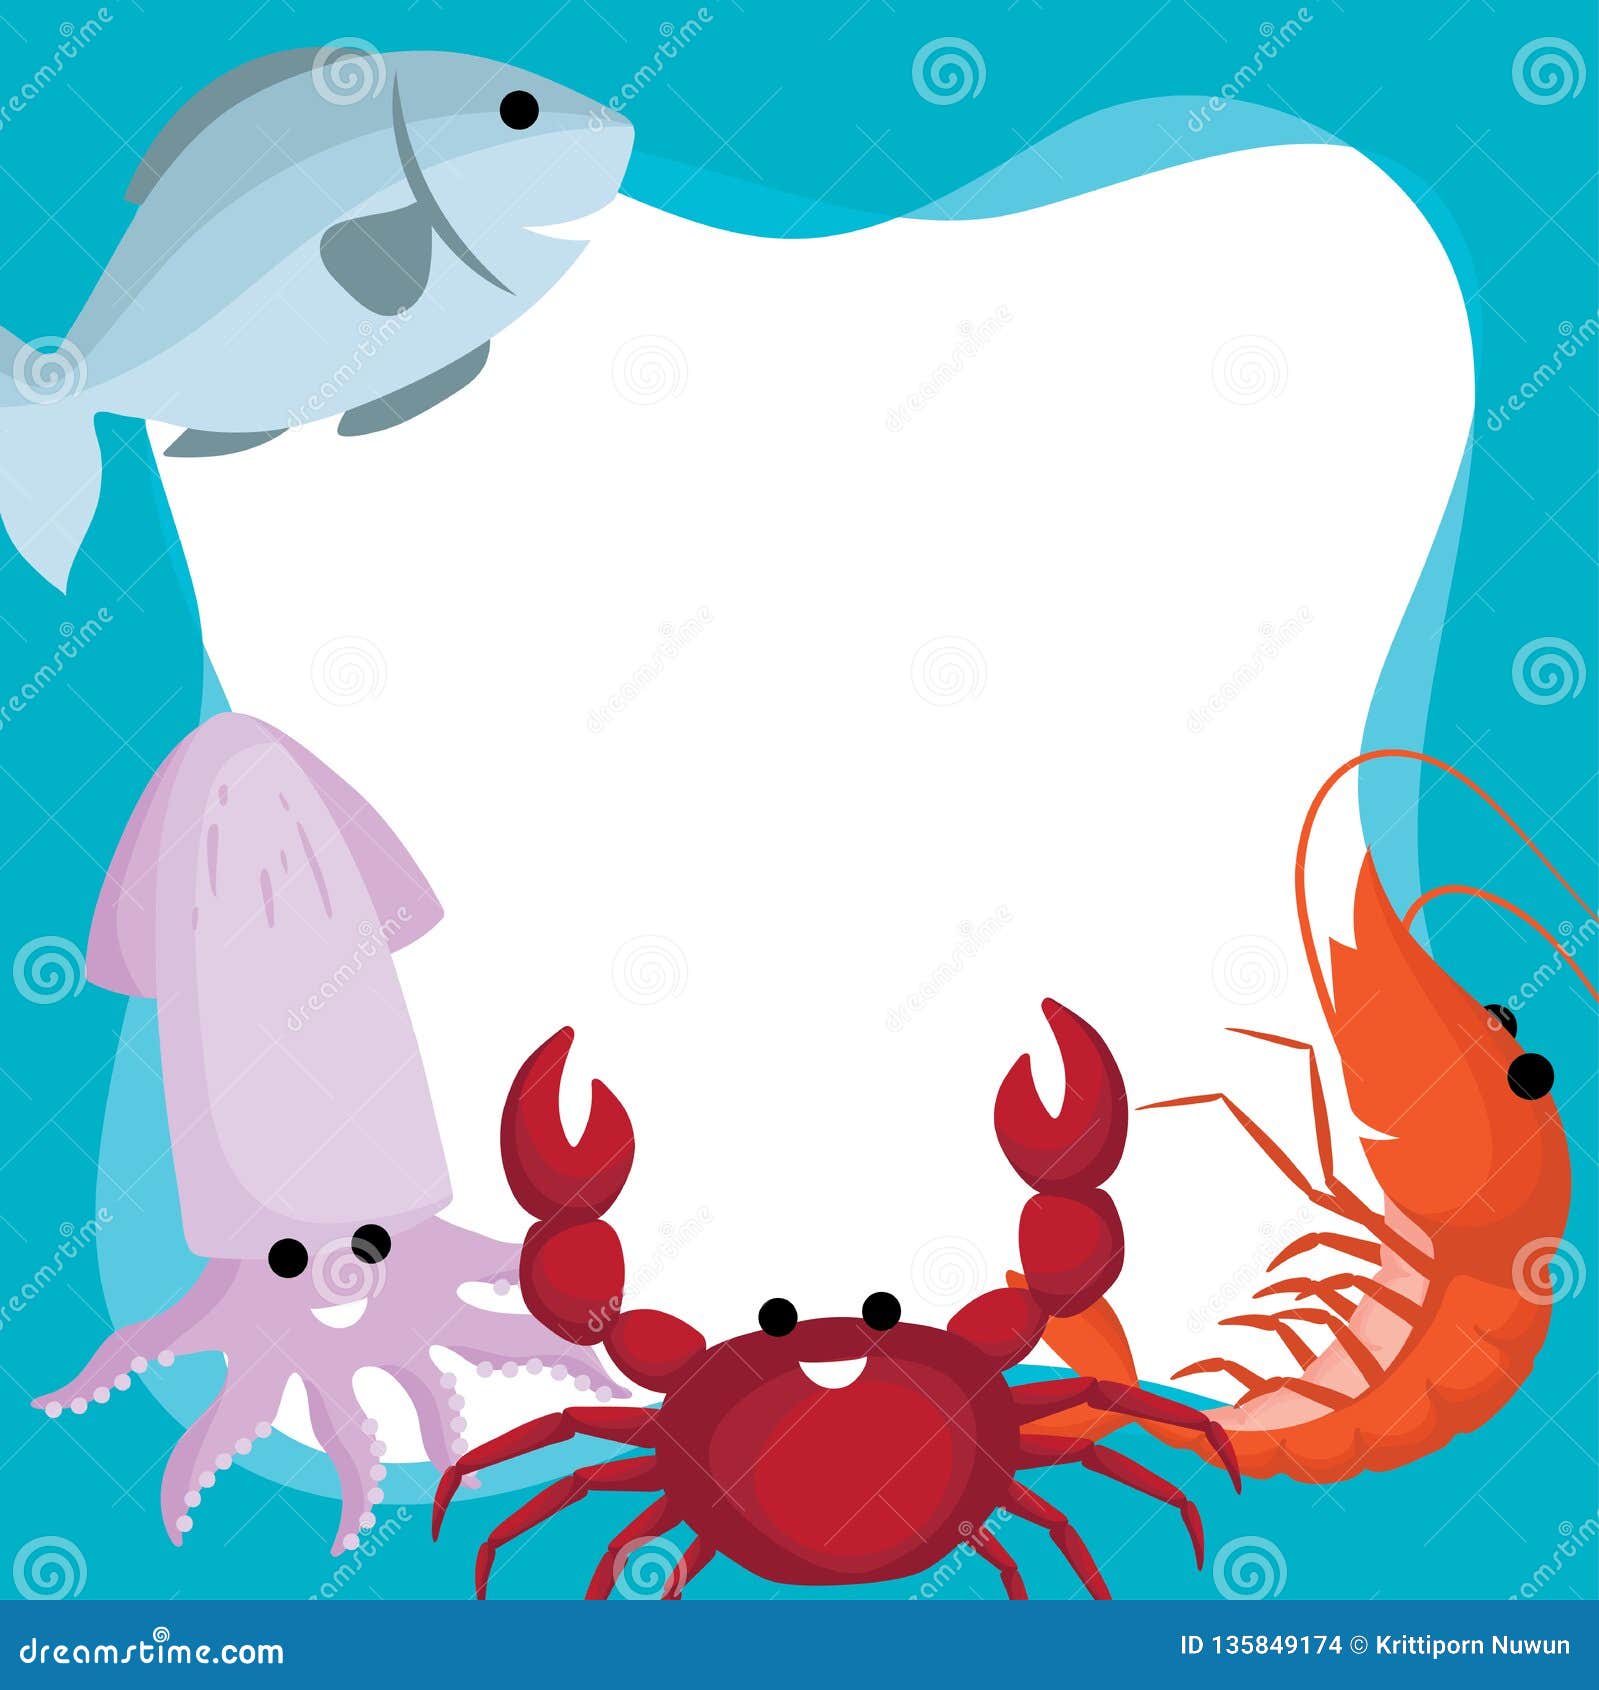 Vector Border and Frame of Doodle Cute Cartoon Seafood, Fish, Crab